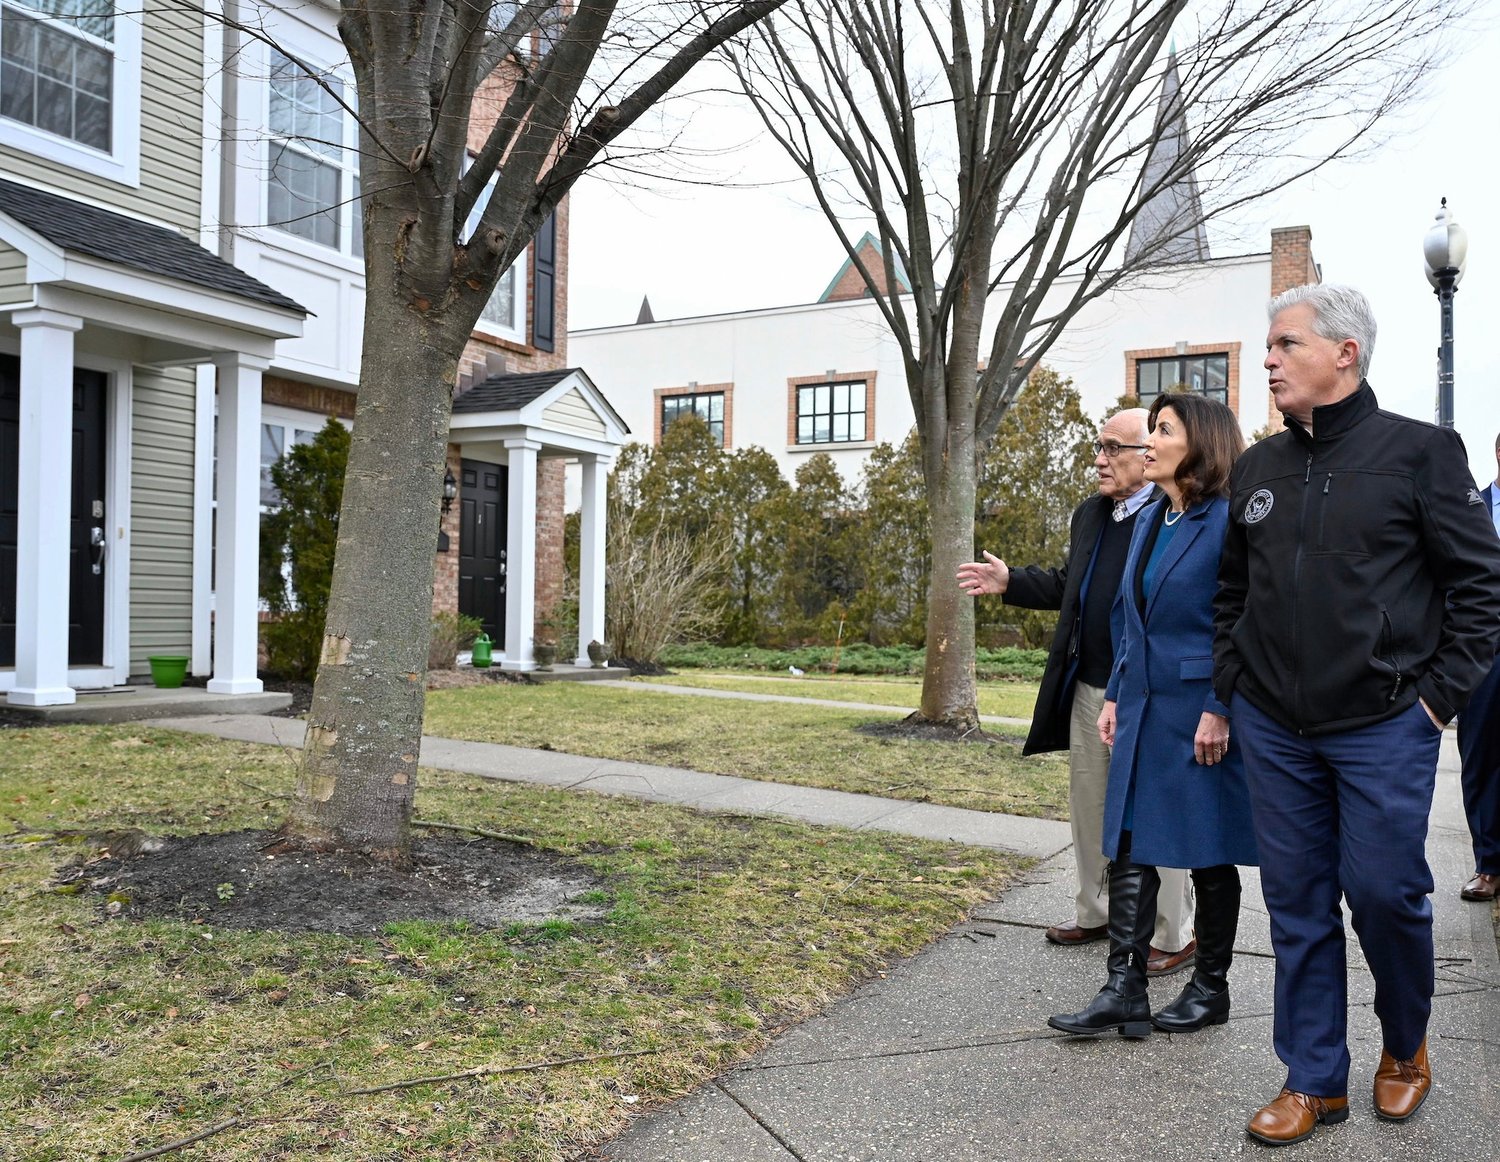 Gov. Kathy Hochul met with Patchogue Village mayor
Paul Pontieri and Suffolk County executive Steve Bellone
last week in Patchogue. In this photo, they are looking at
one of the many housing developments in the village.